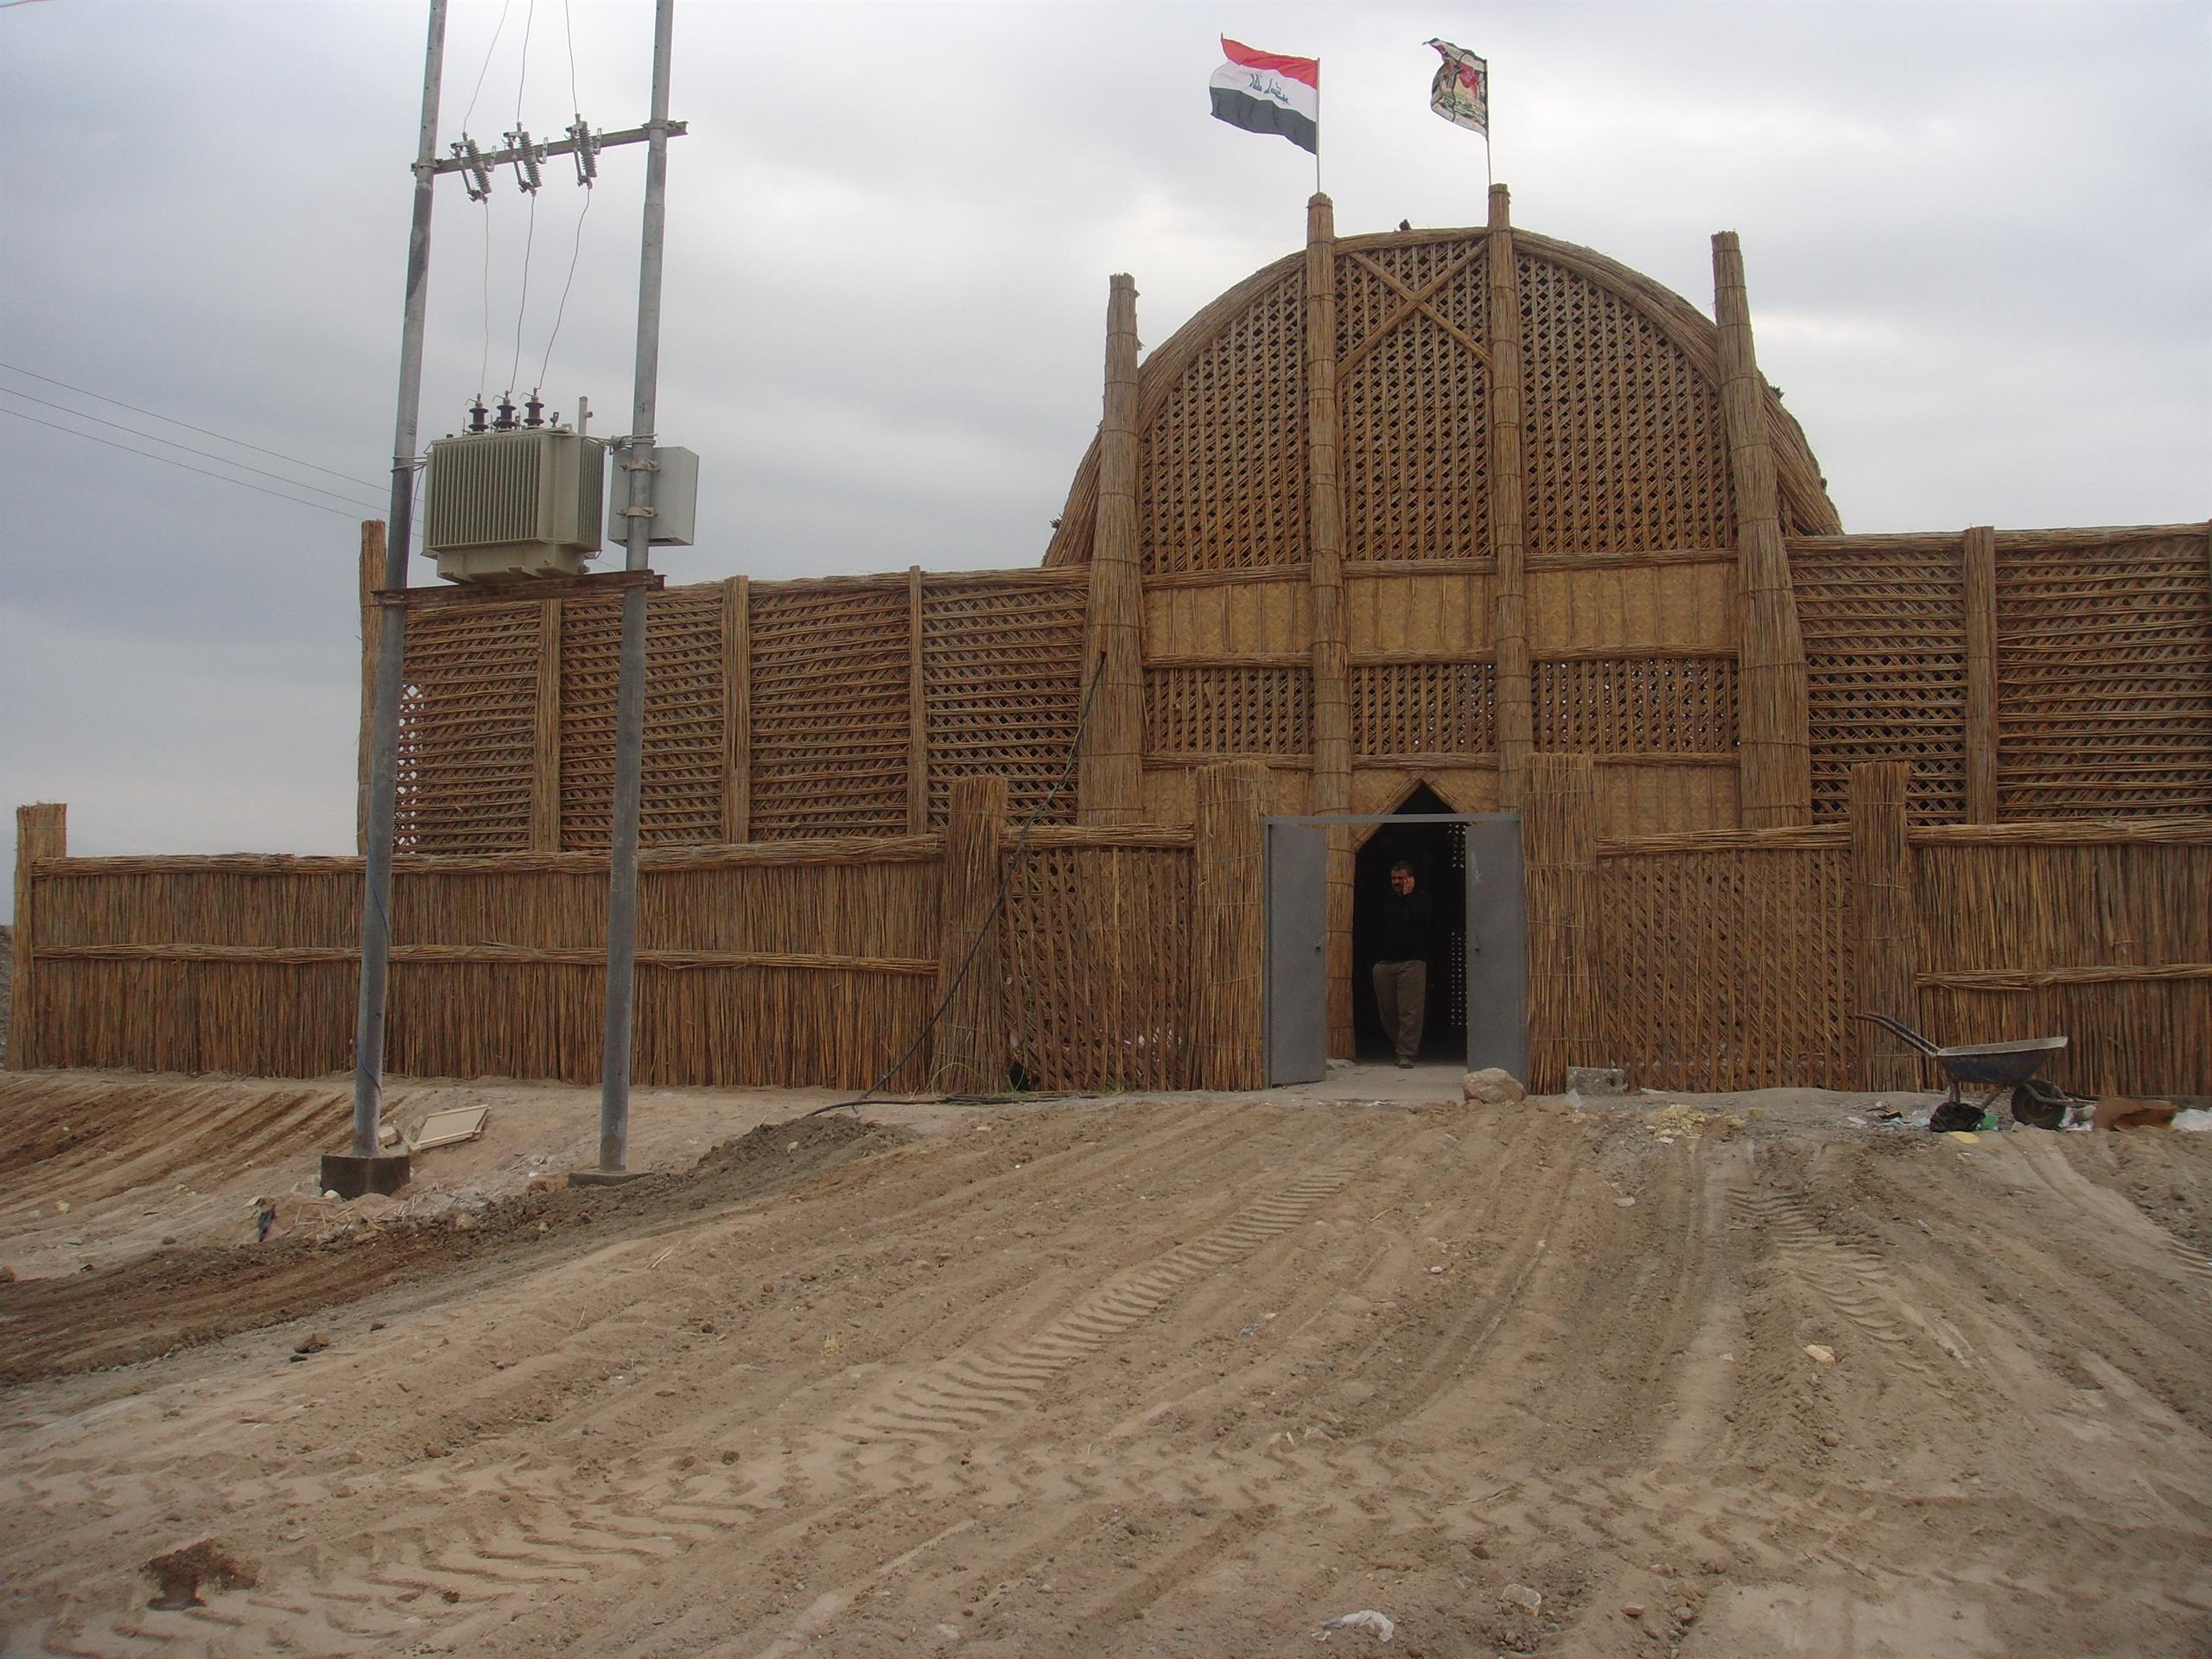 Entrance to school building in Iraq.